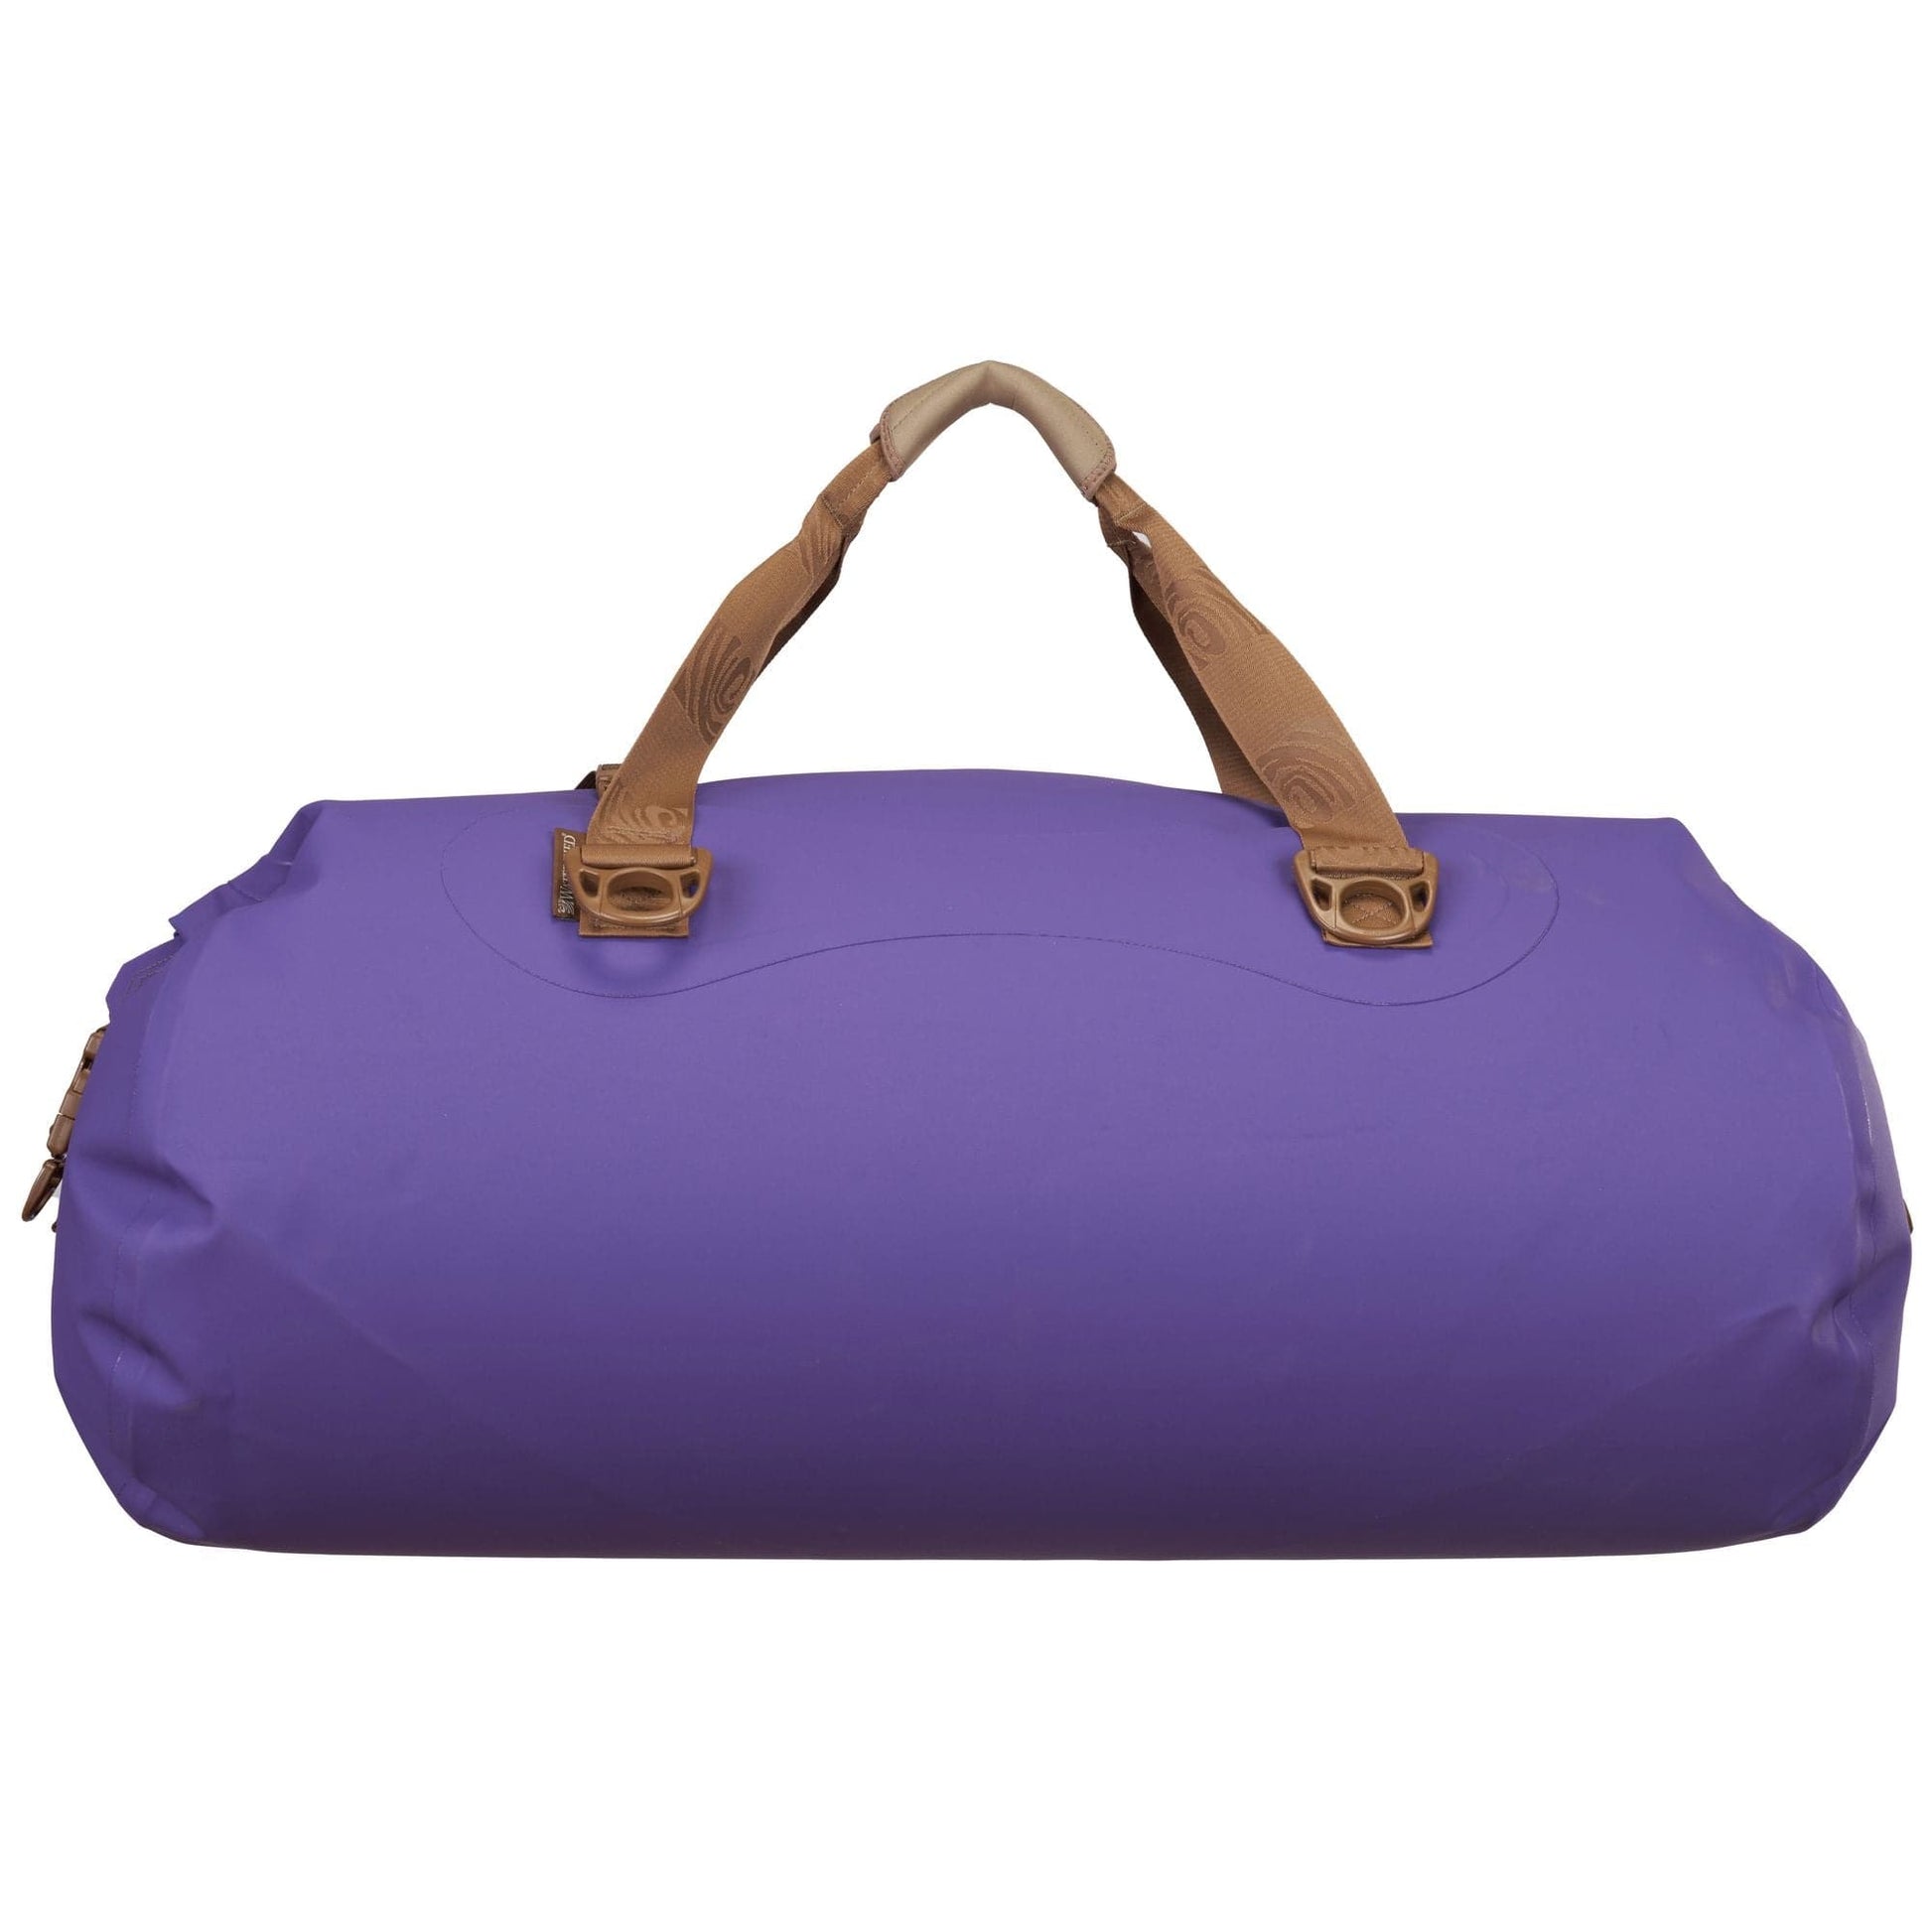 Featuring the Colorado Duffel dry bag manufactured by Watershed shown here from one angle.